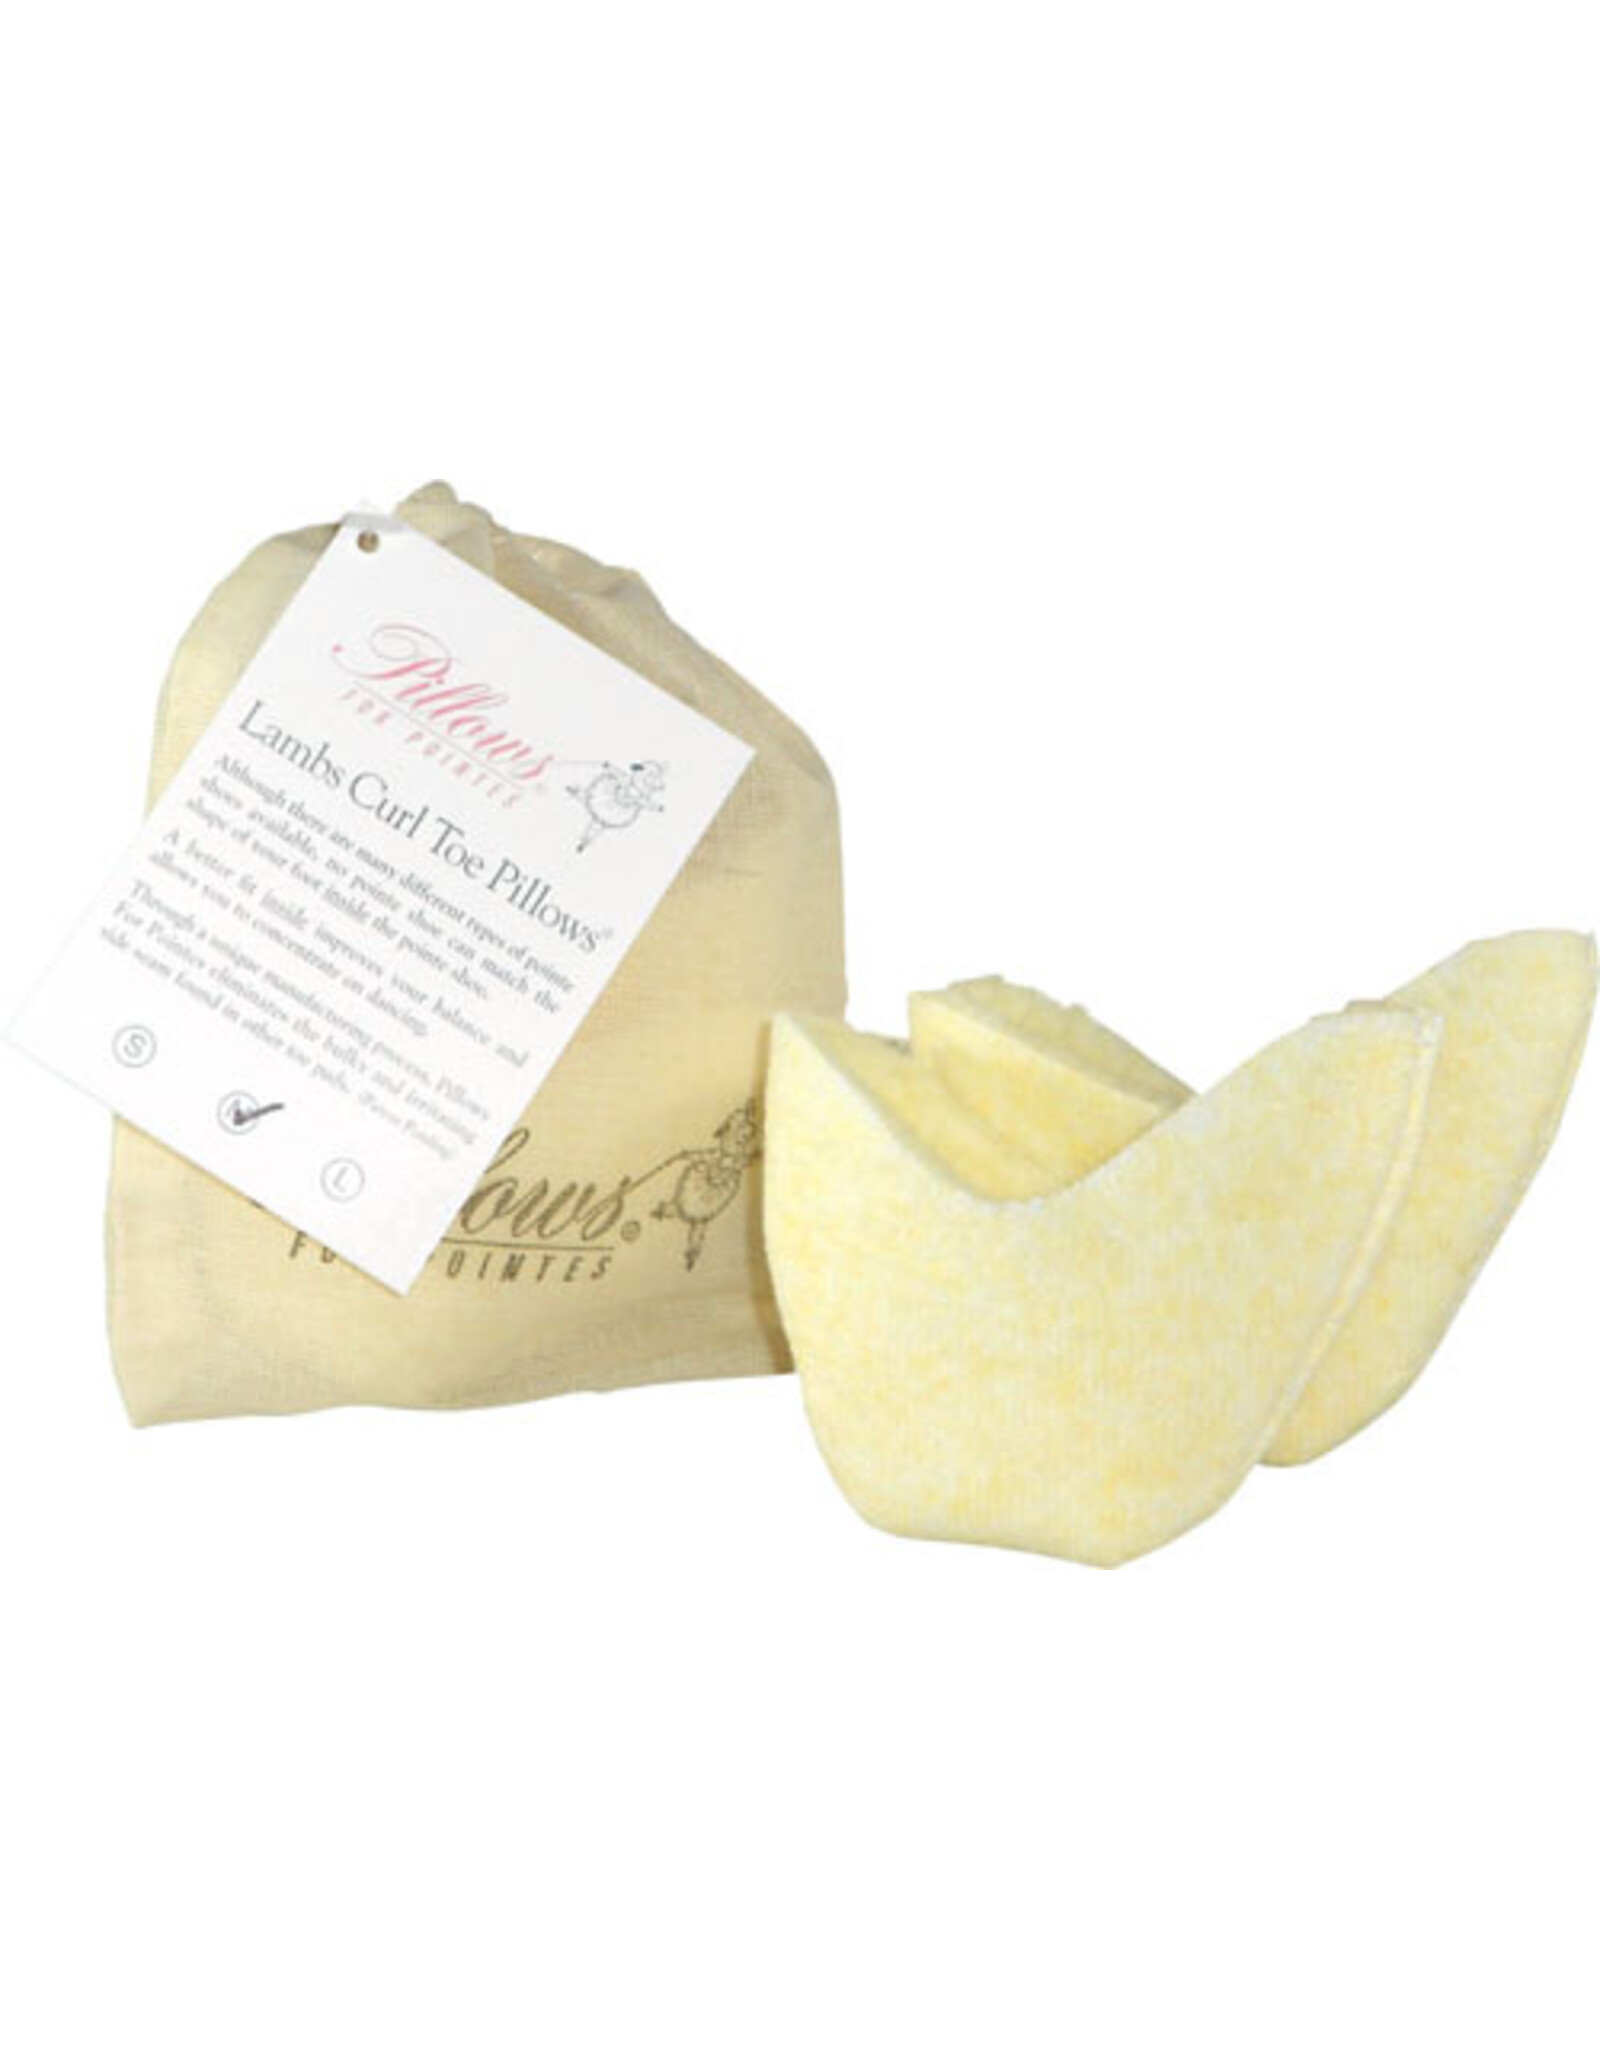 Pillows for Pointes Lambs Curl Toe Pillows (LCTP)